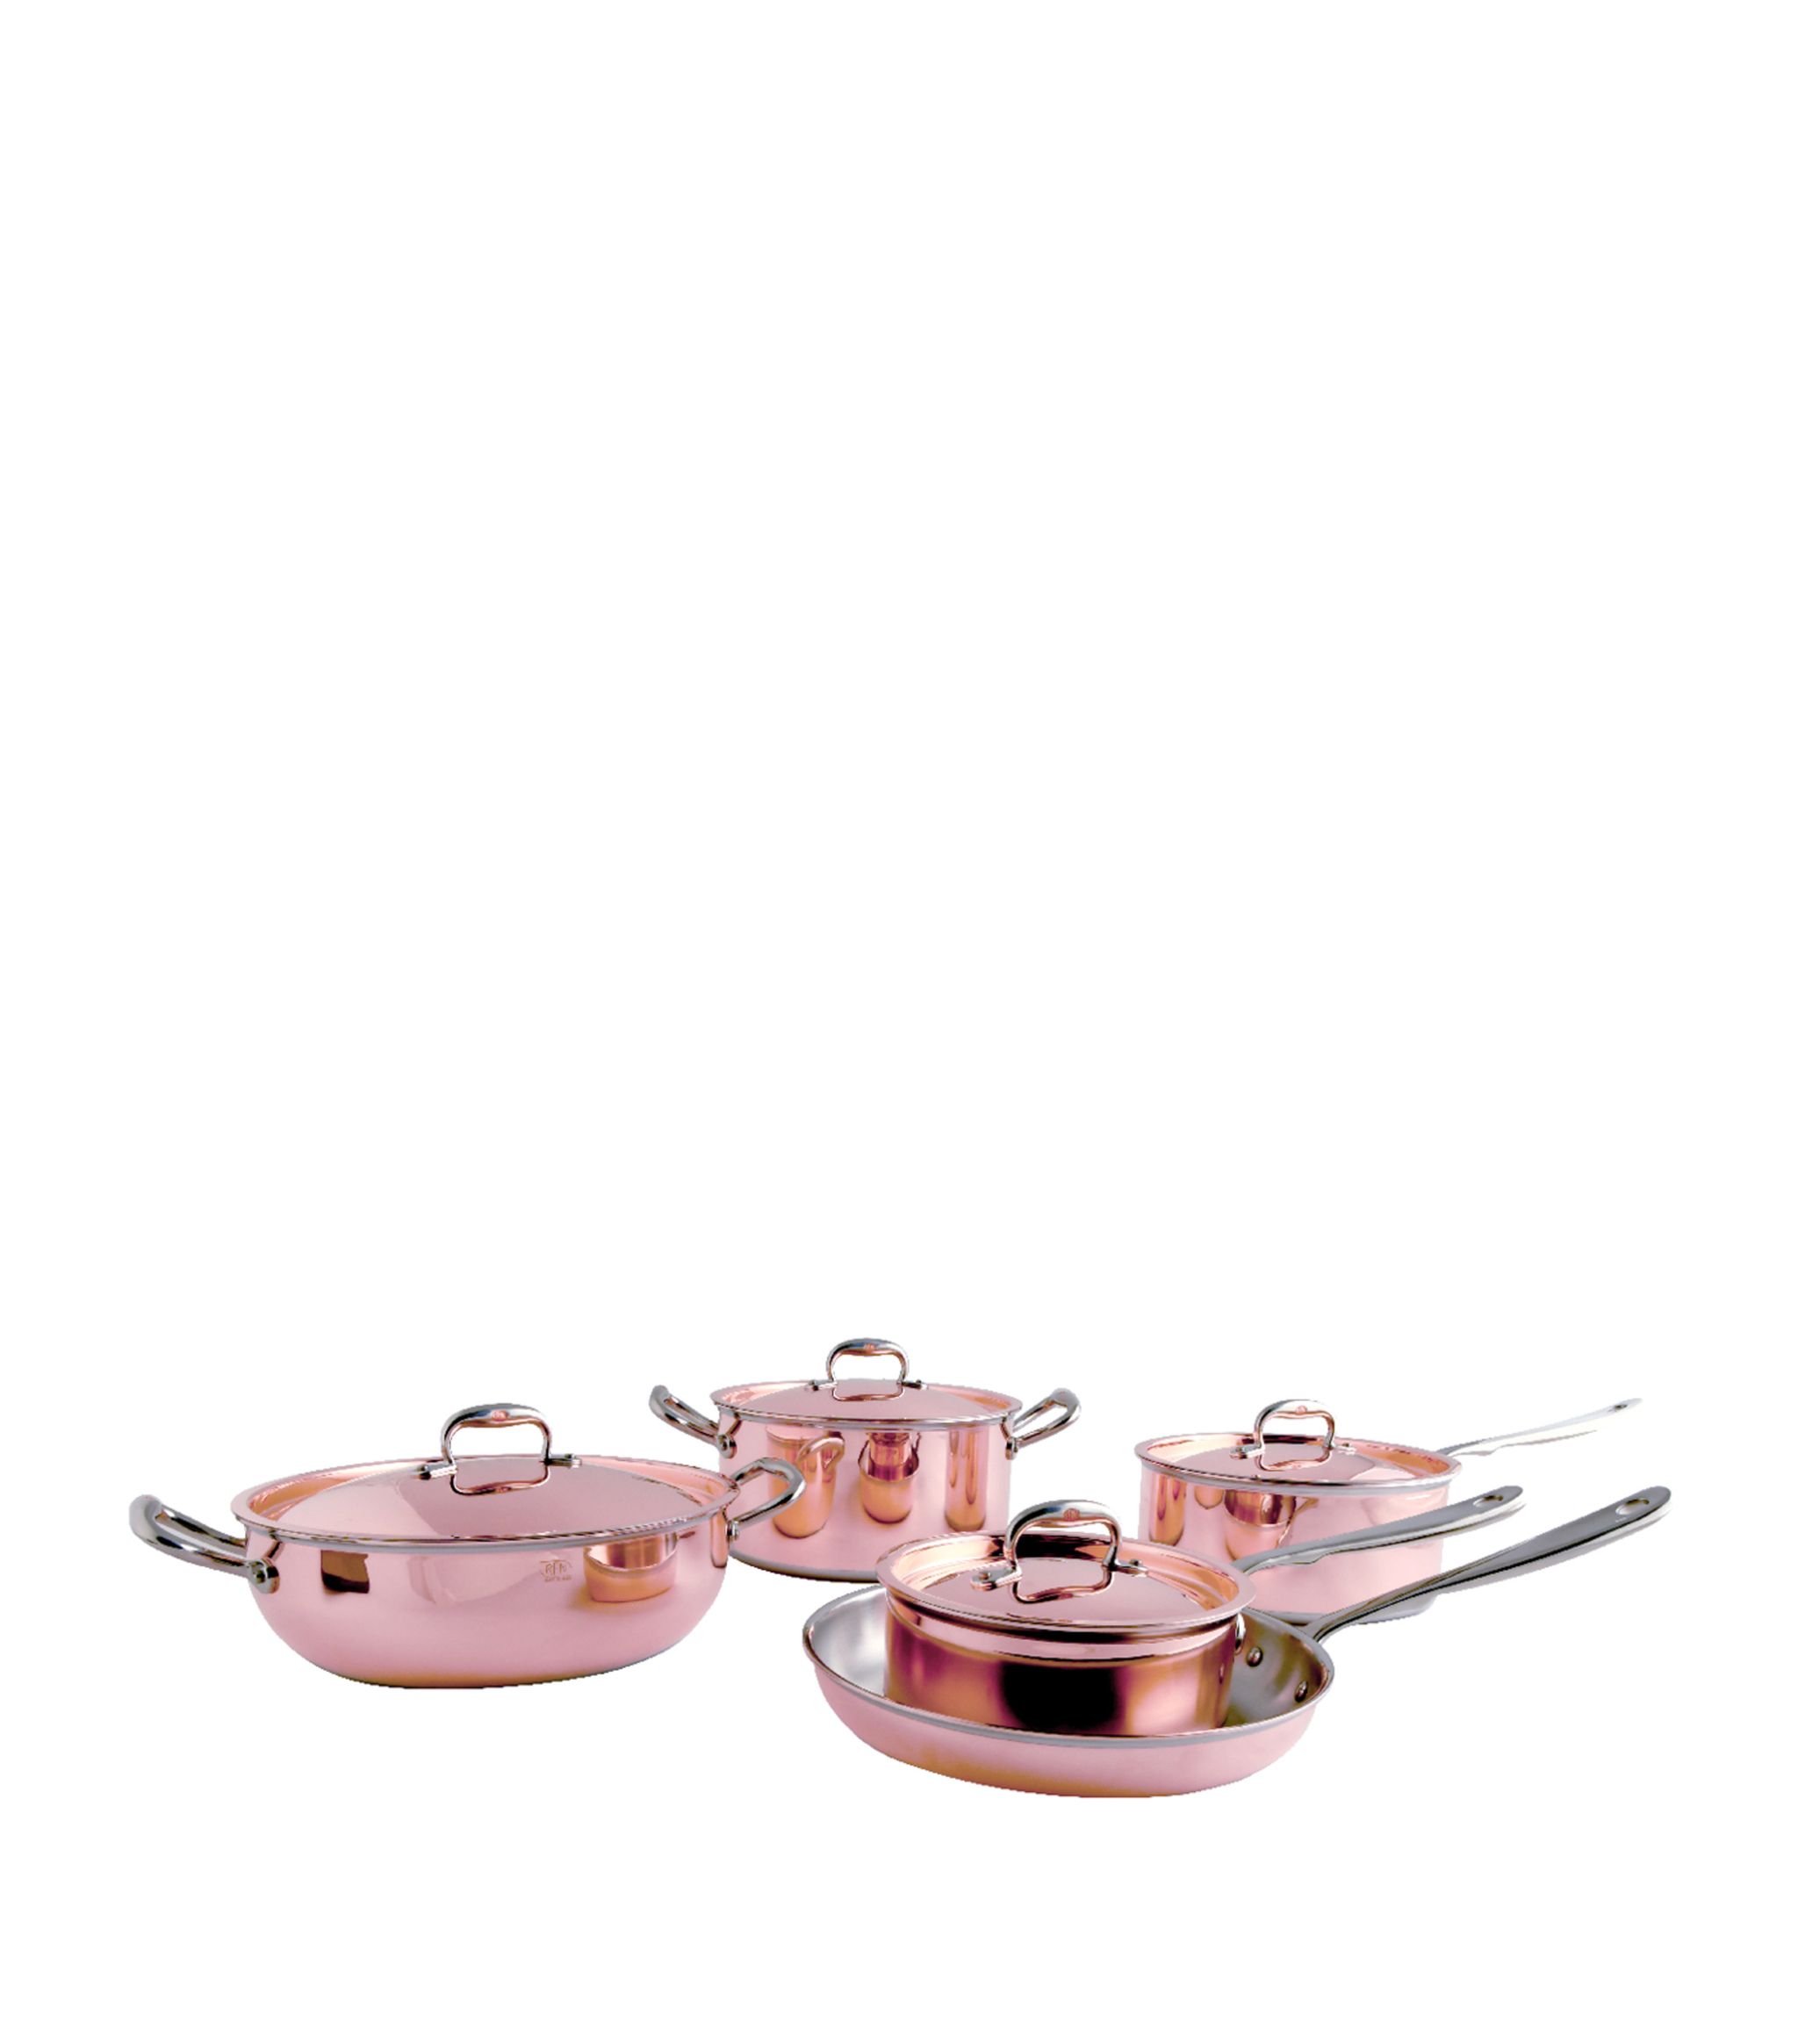 https://qualitycookingpots.com/wp-content/uploads/2017/12/Ruffoni-Symphonia-Cupra-6-Piece-Set-in-Wooden-Box-All-in-Ghana-Tema-Accra-Quality-Cooking-Pots-Store-Call-0201802032.jpg